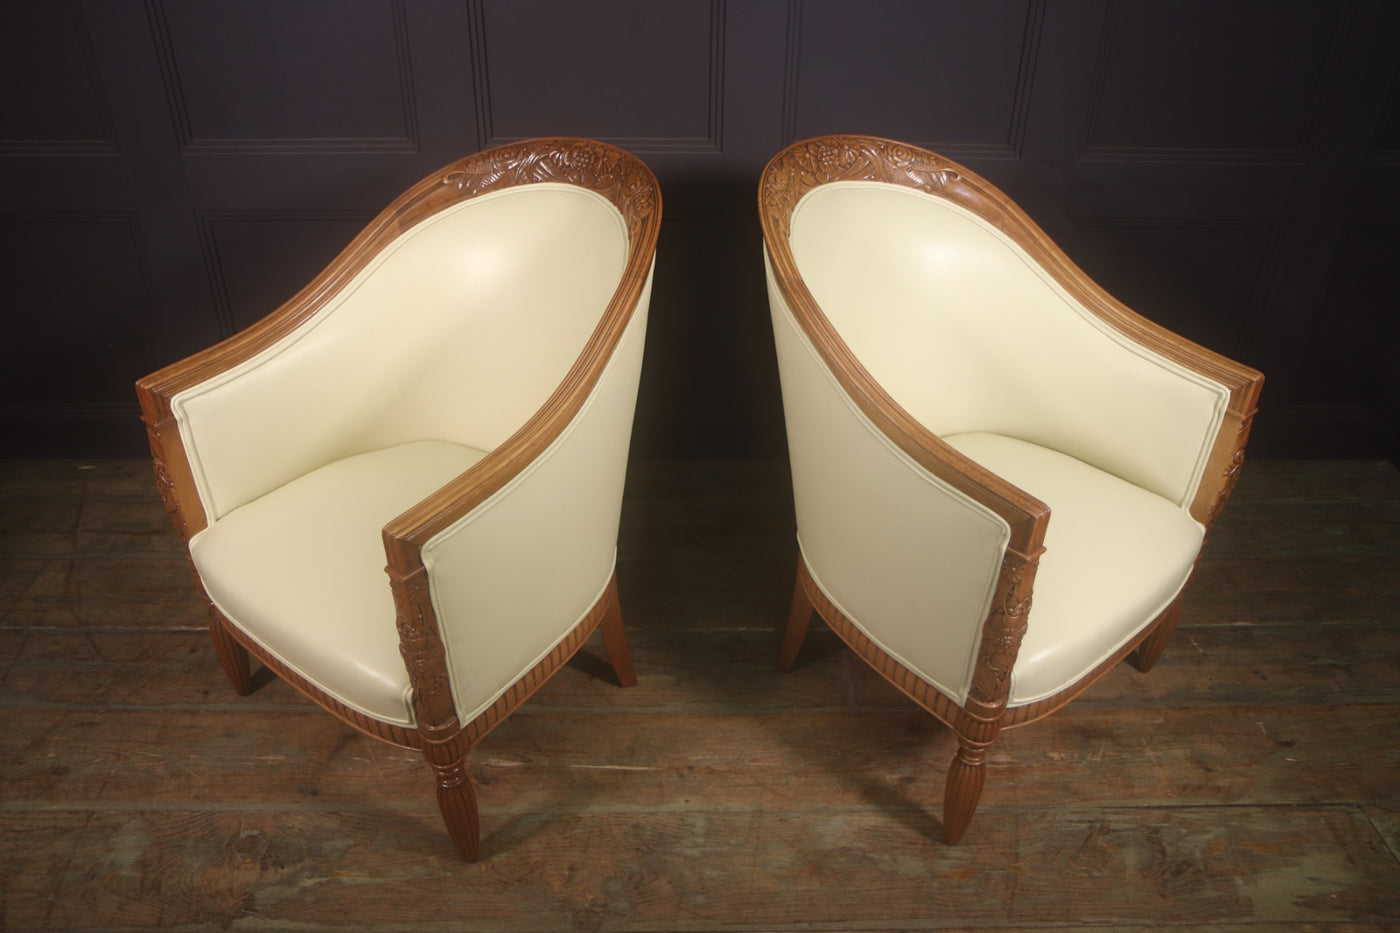 Pair of Carved Pear French Art Deco Armchairs